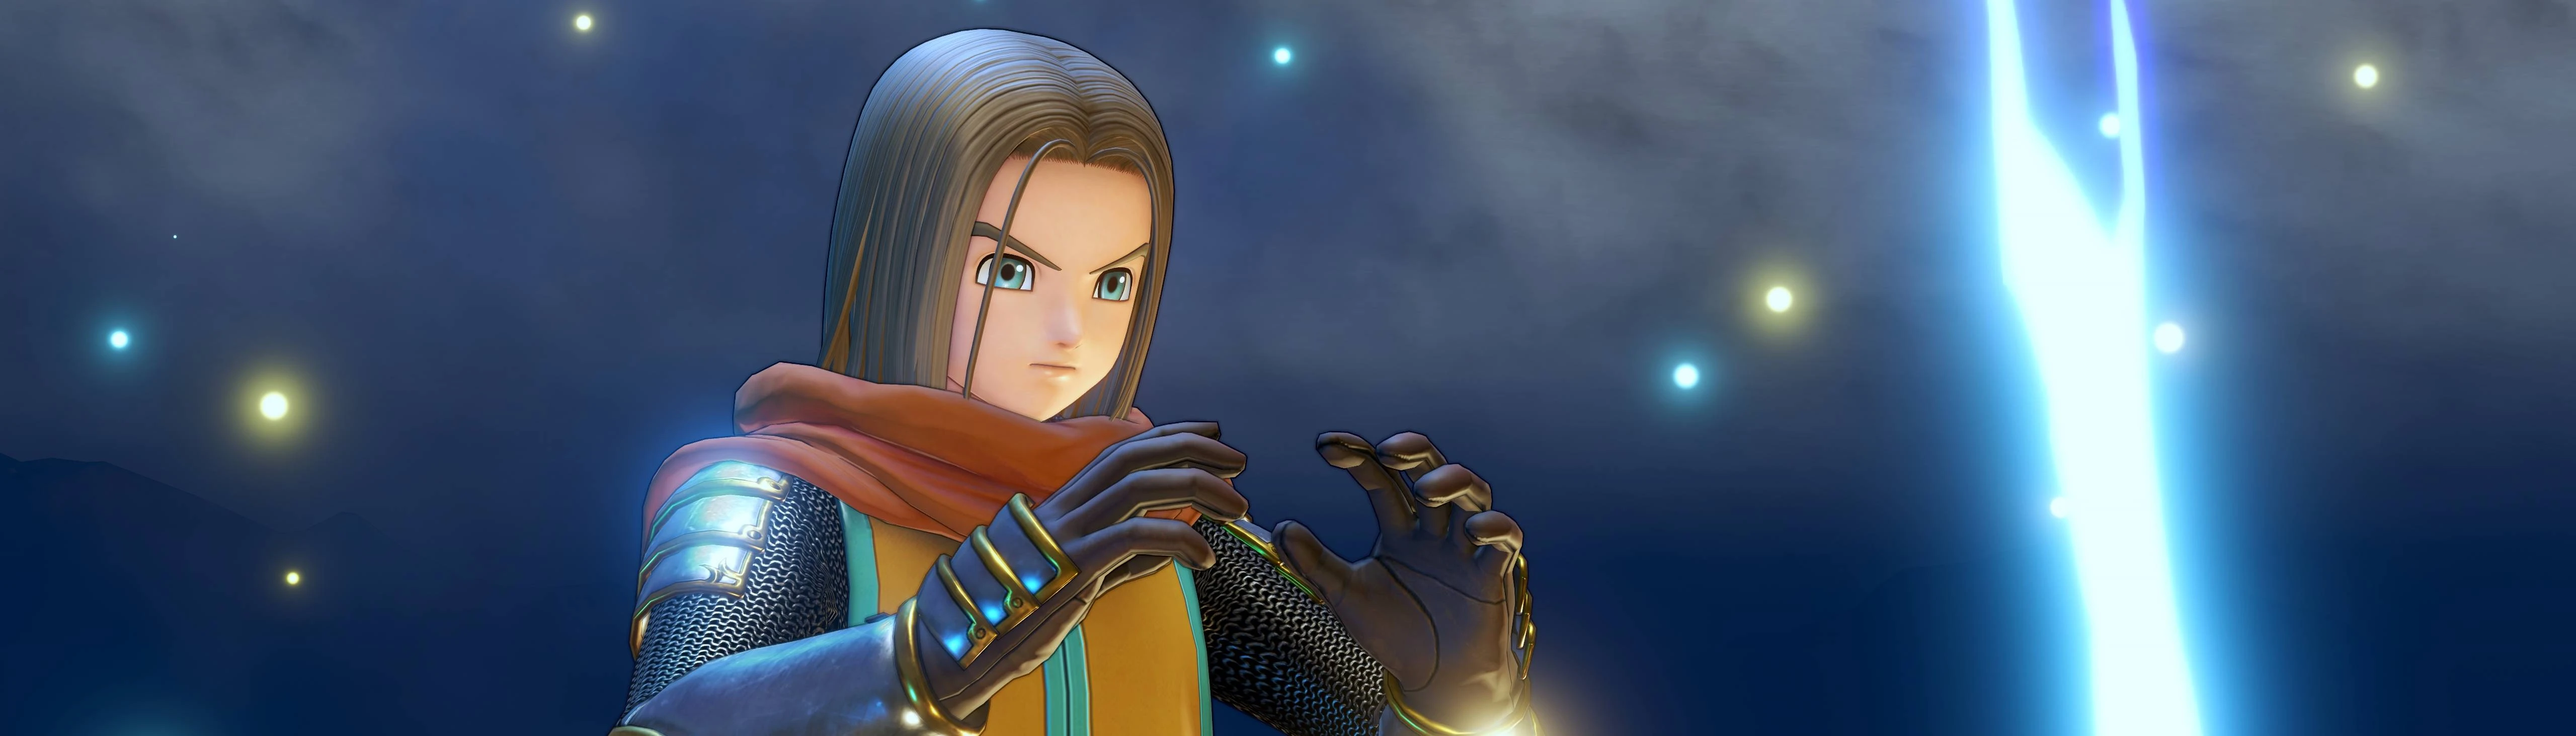 Mods of the month at Dragon Quest XI S: Echoes of an Elusive Age -  Definitive Edition Nexus - Mods and community